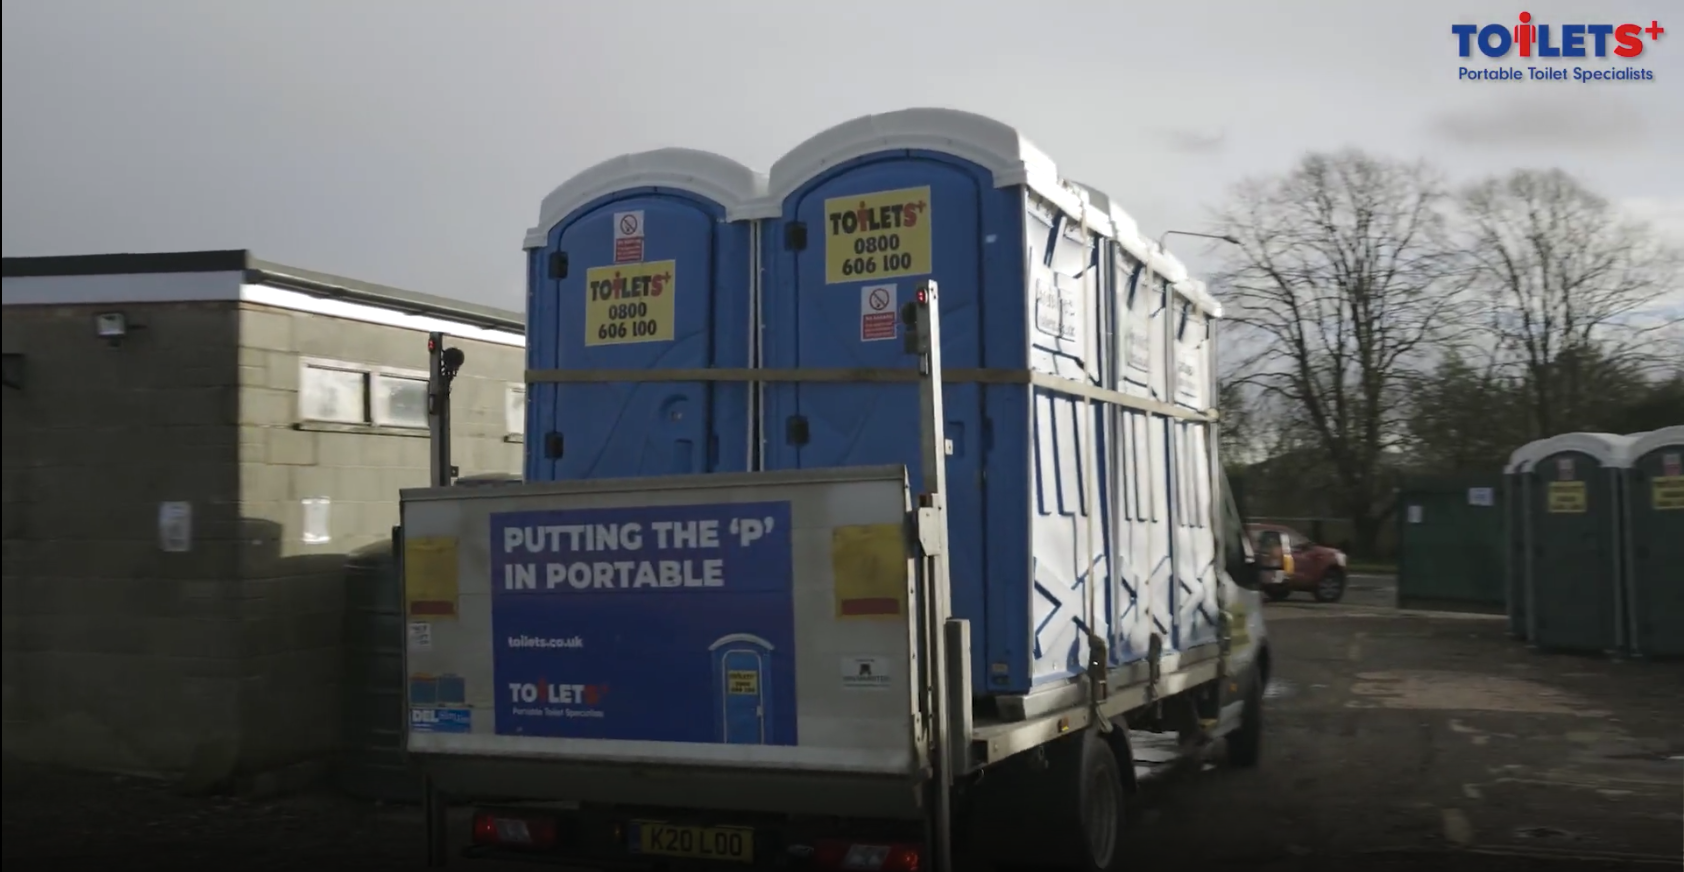 portable toilets hire day in the life video screenshot